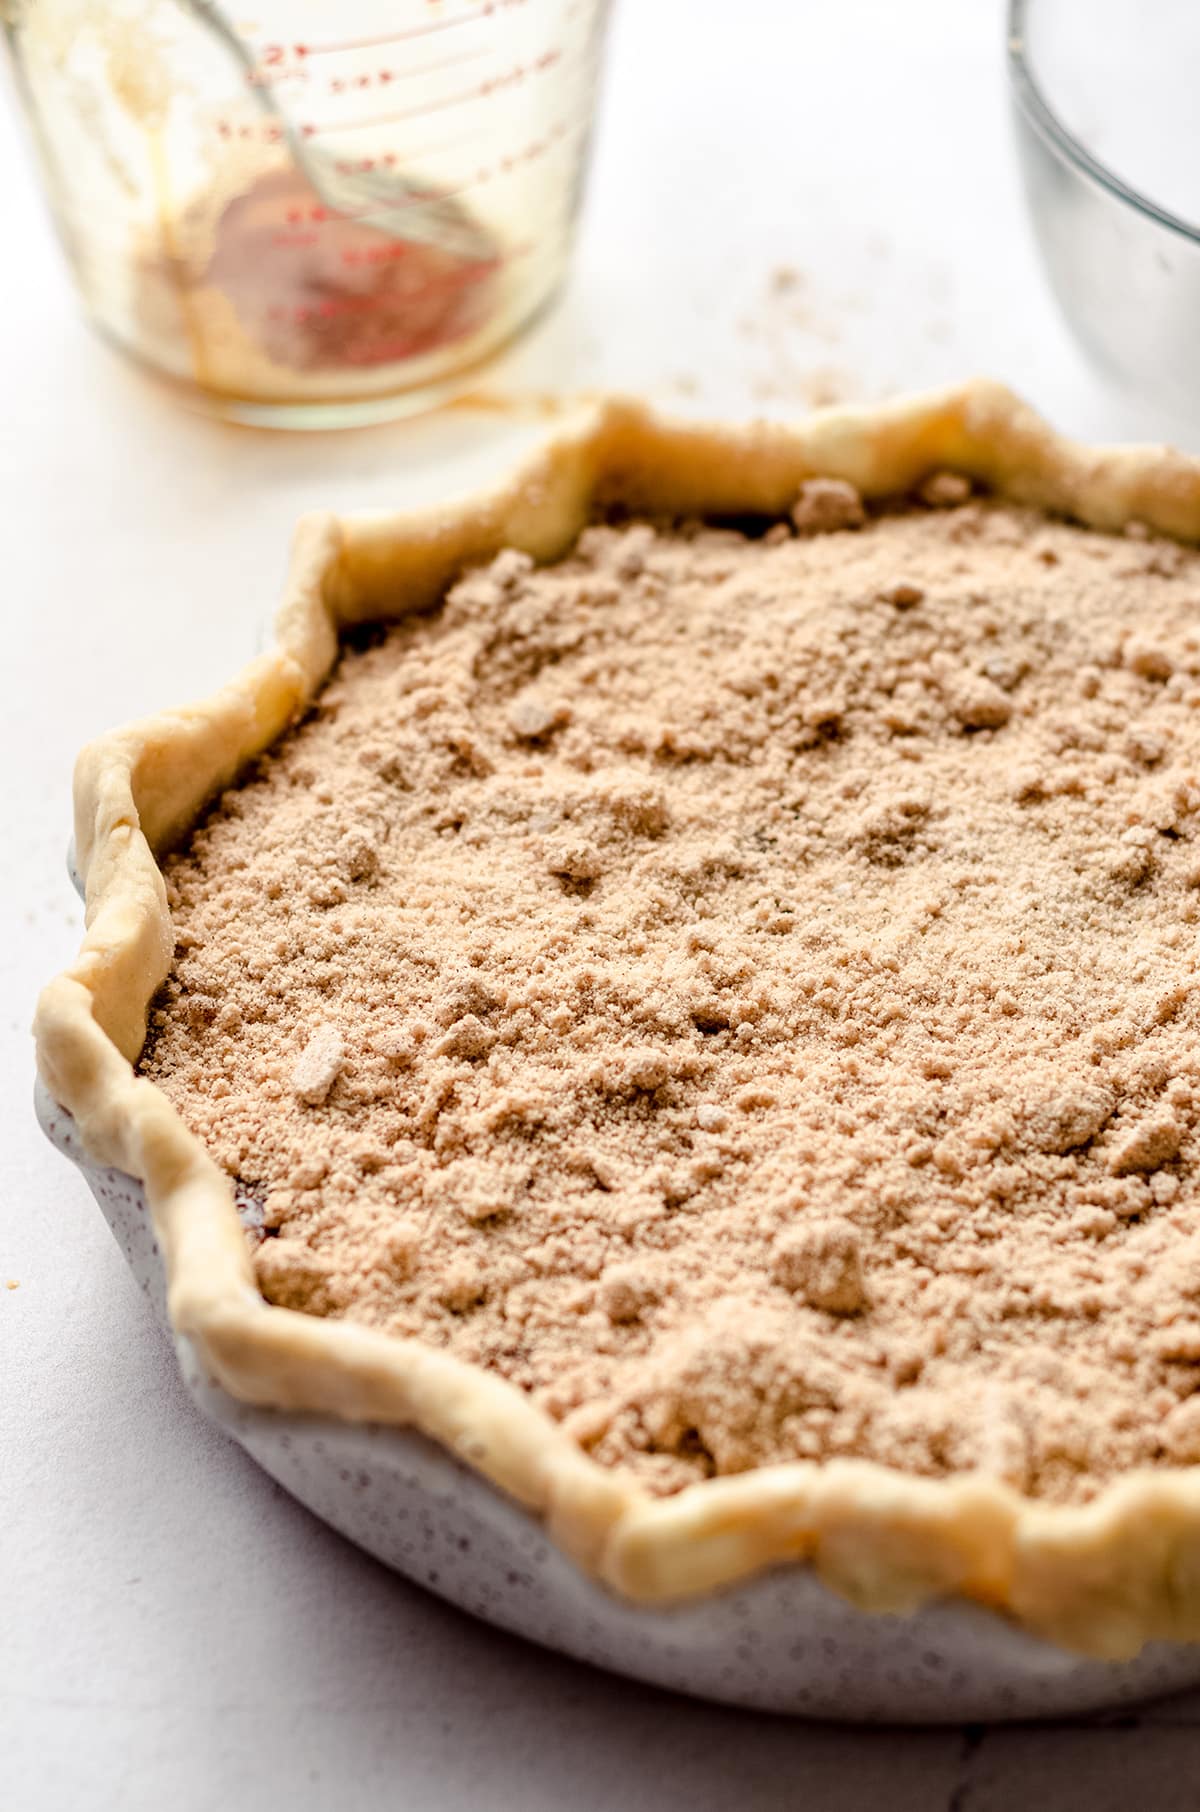 A pie topped with a crumb mixture.